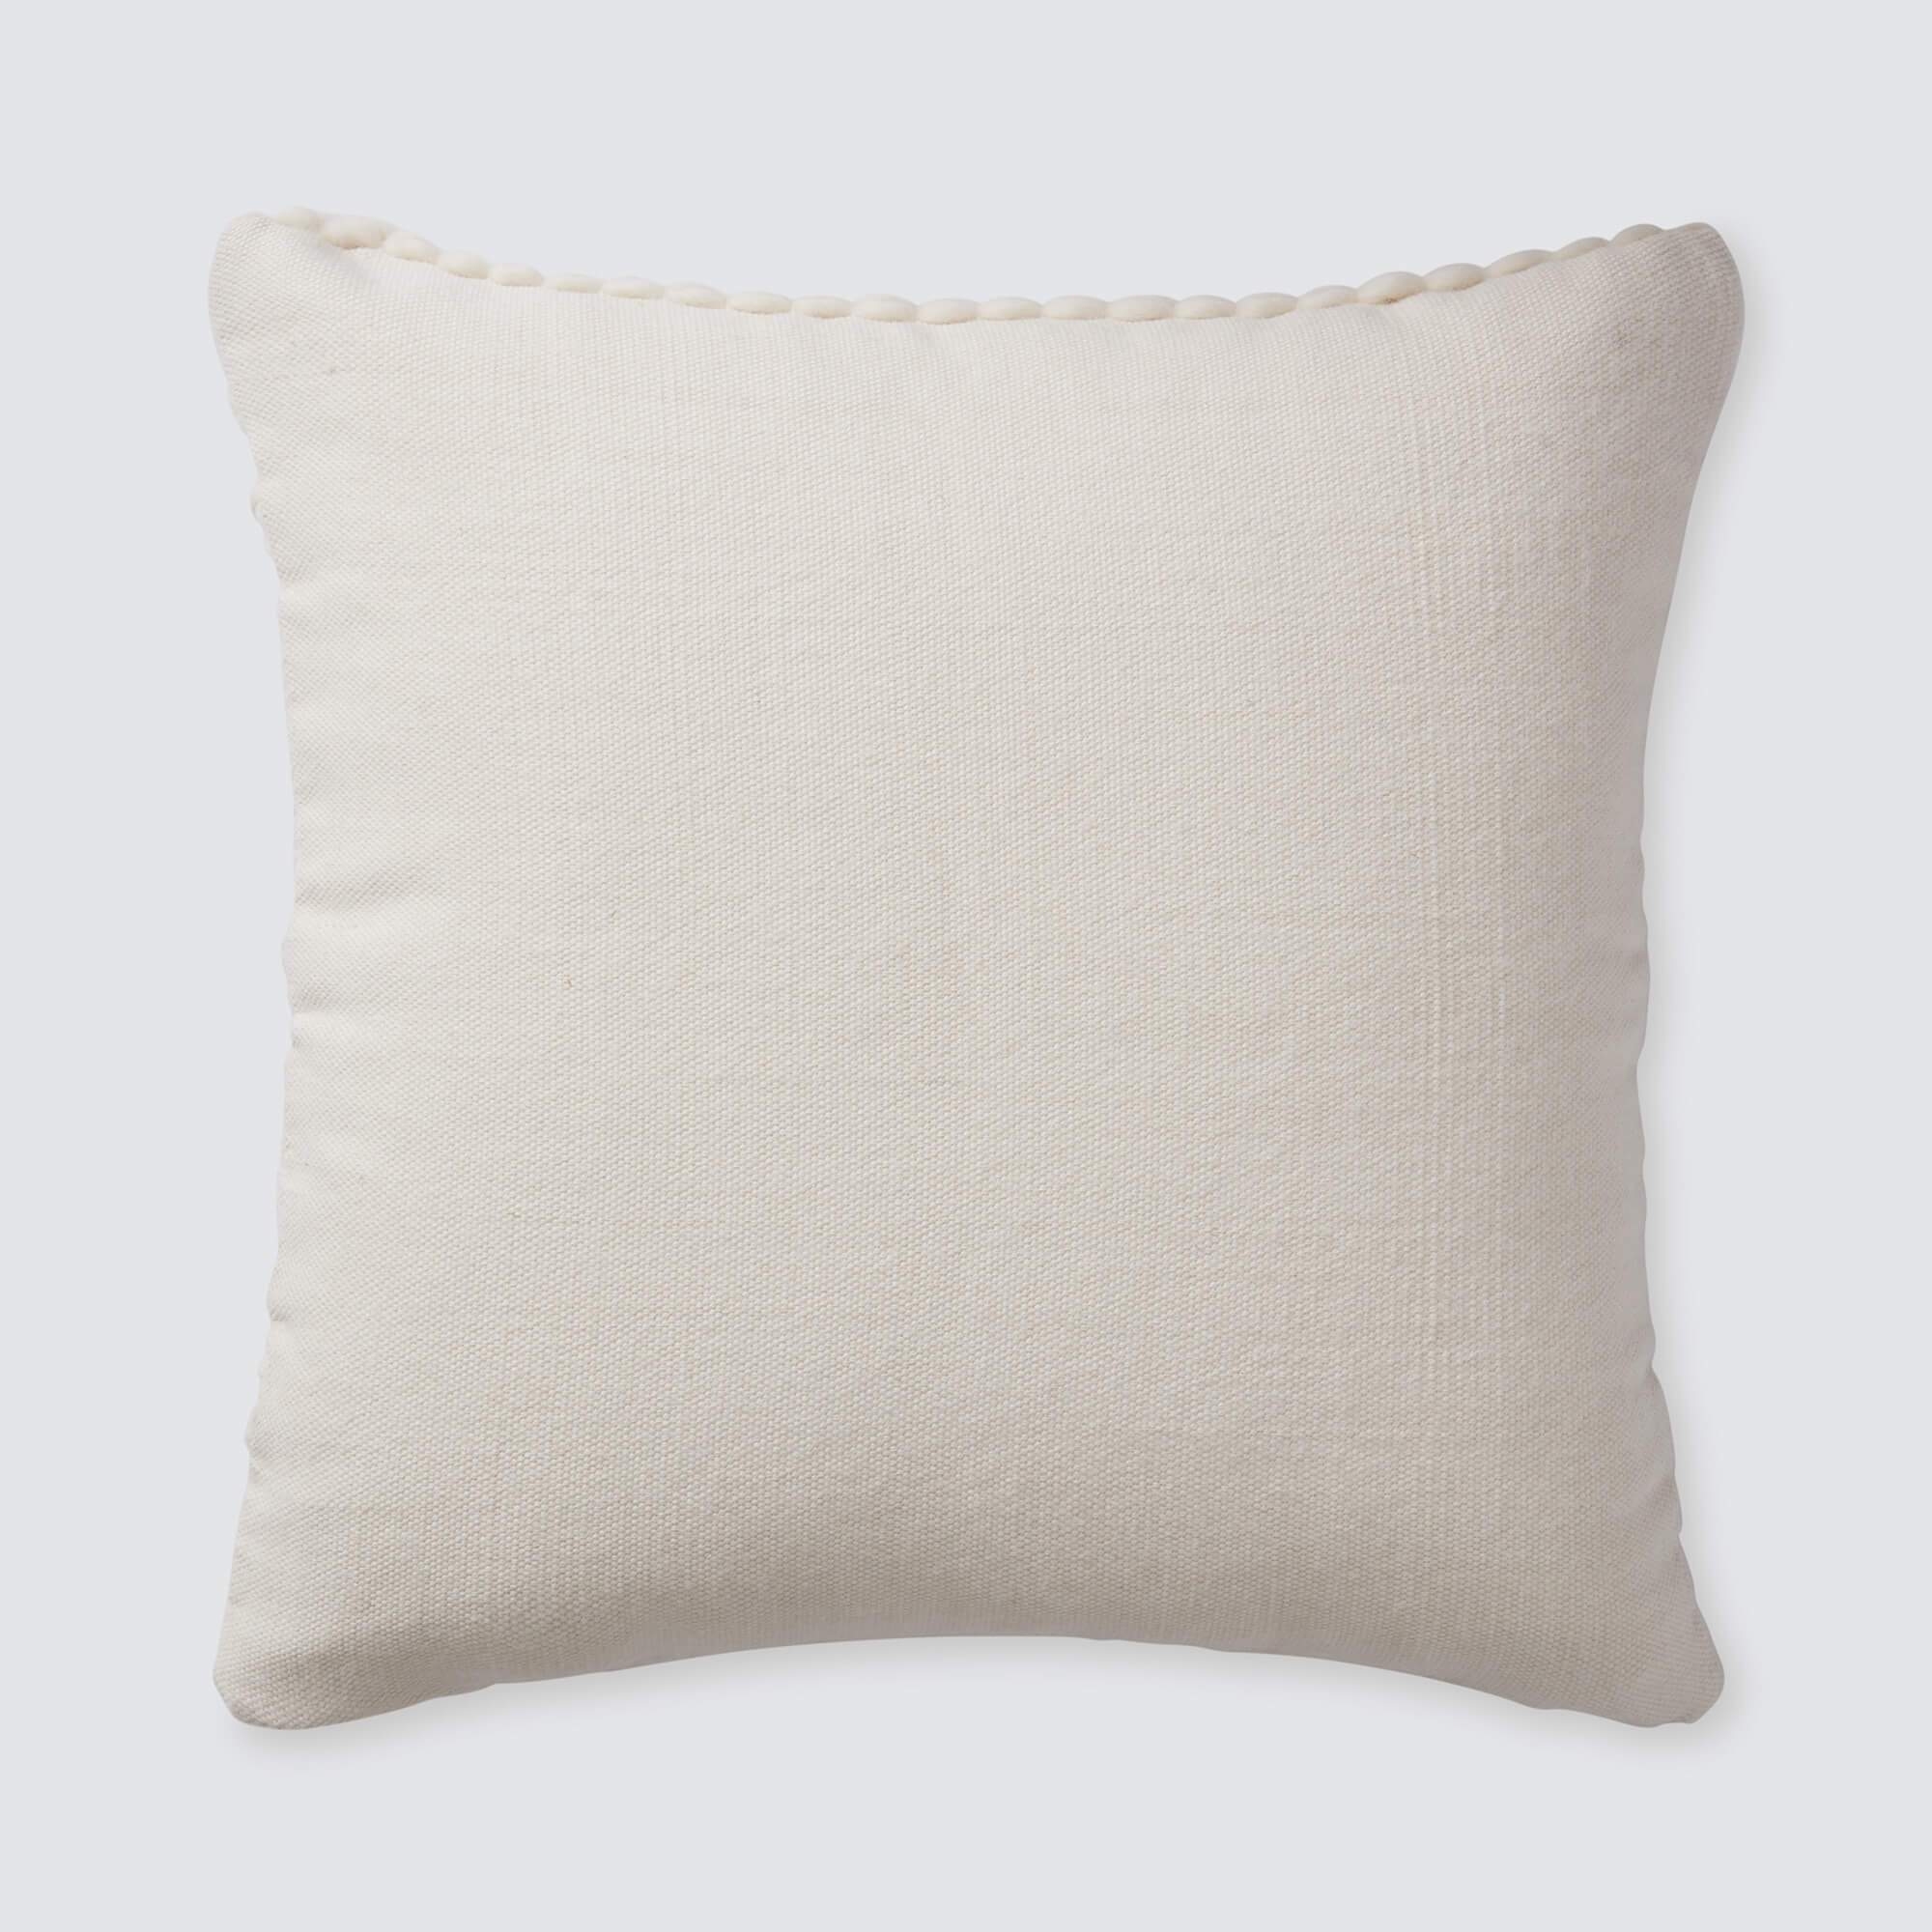 The Citizenry La Nieve Pillow | Ivory - Image 6